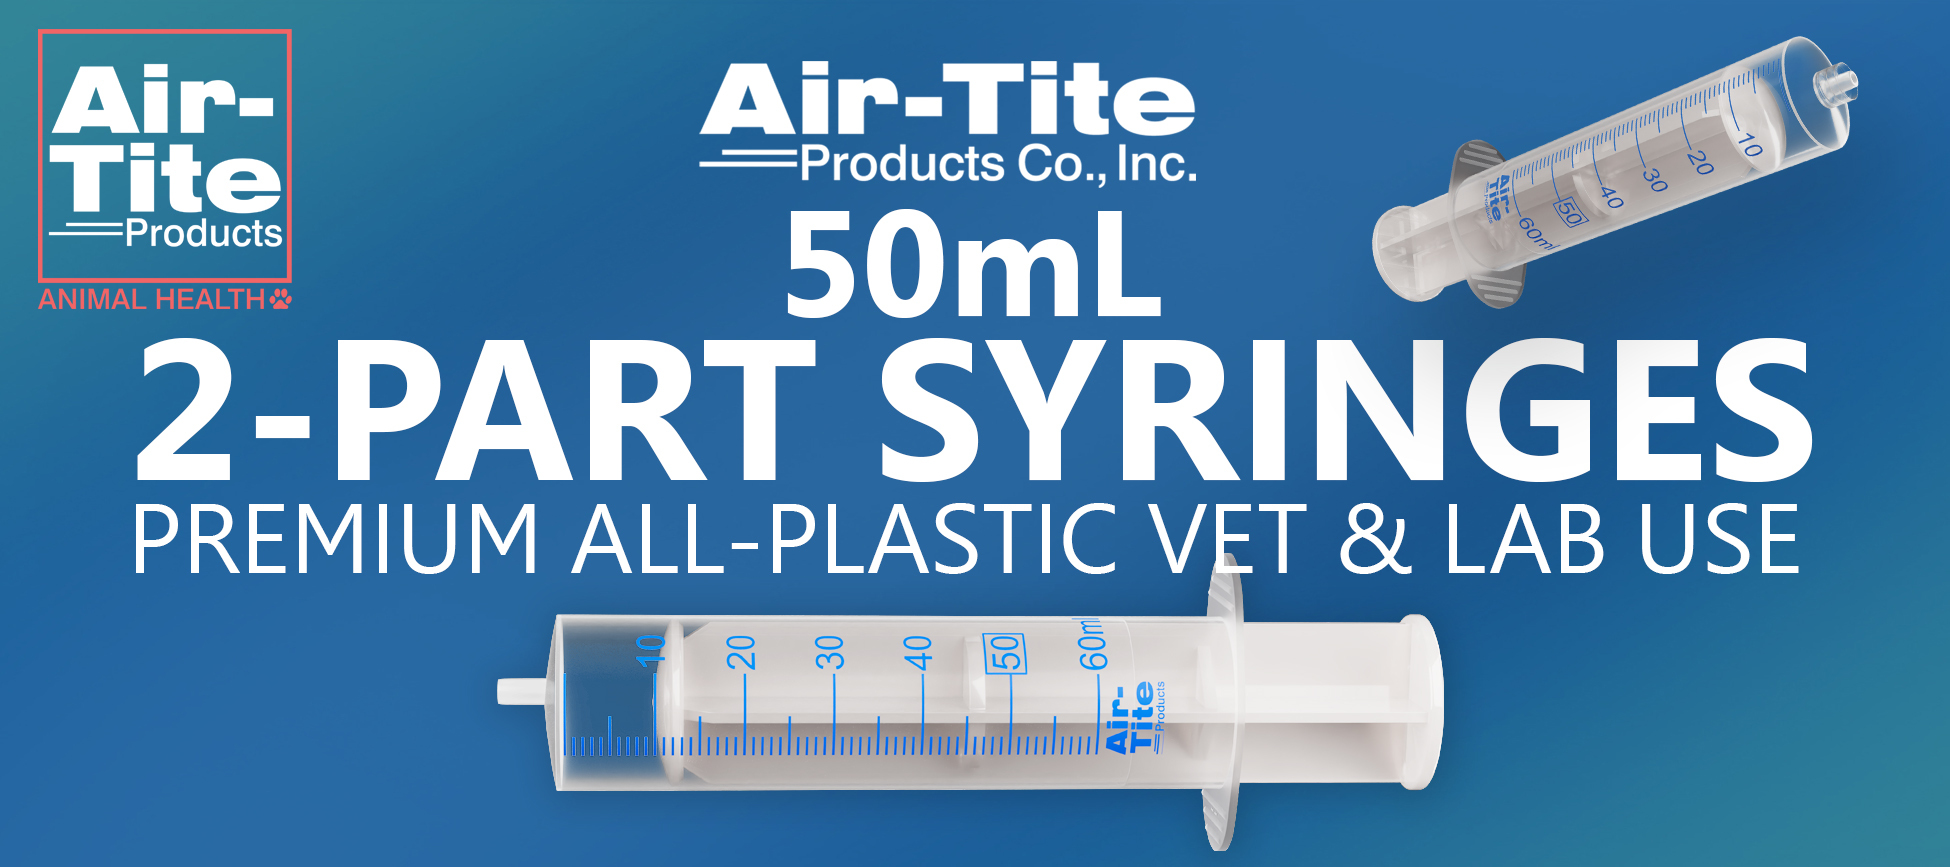 Air-Tite Introduces New 50ml 2-Part Syringe for Veterinary & Laboratory Applications